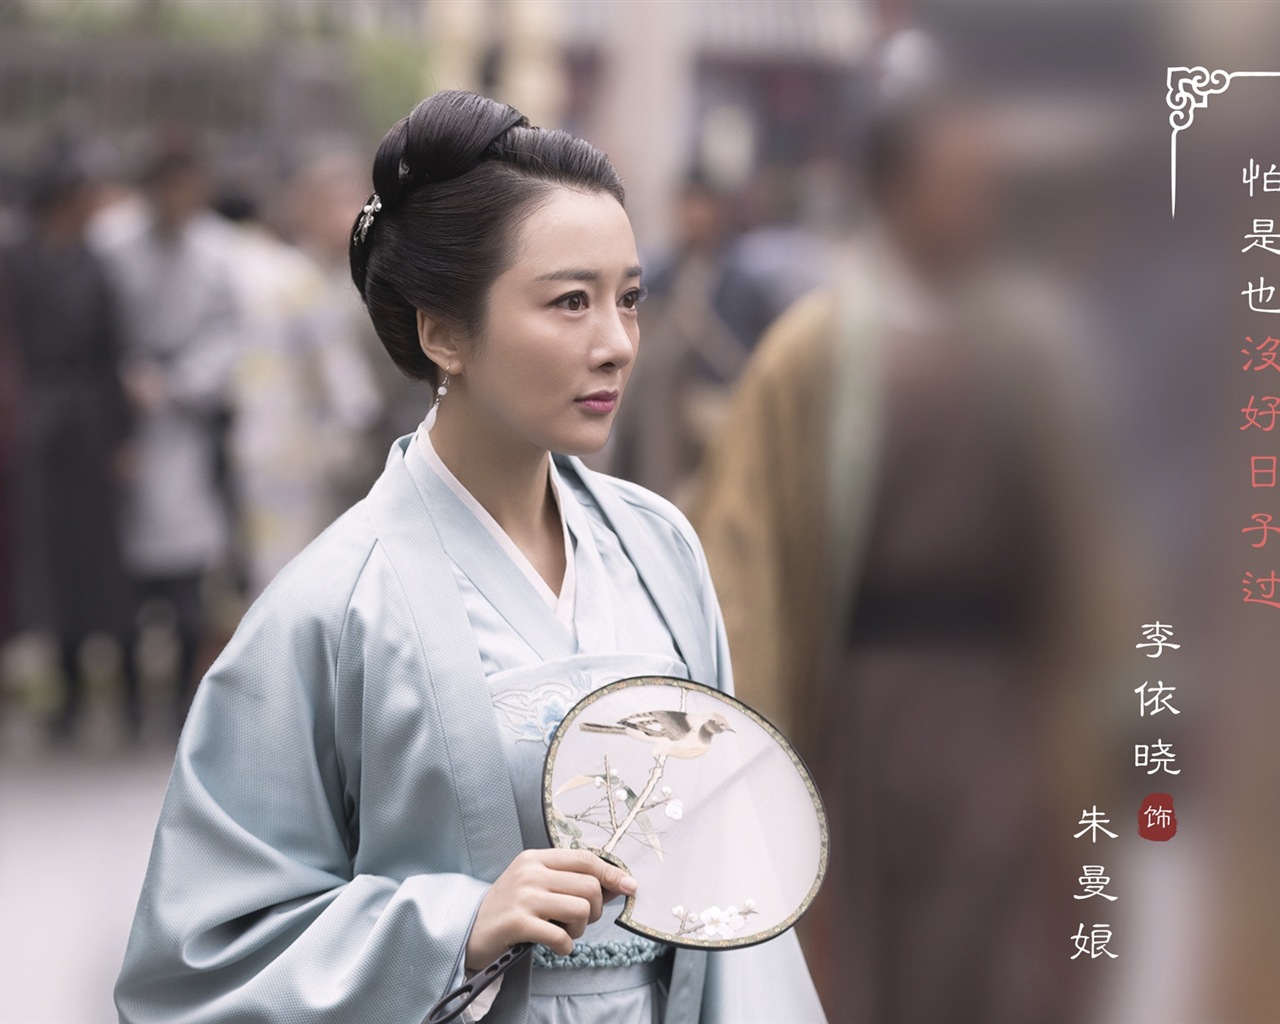 The Story Of MingLan, TV series HD wallpapers #34 - 1280x1024